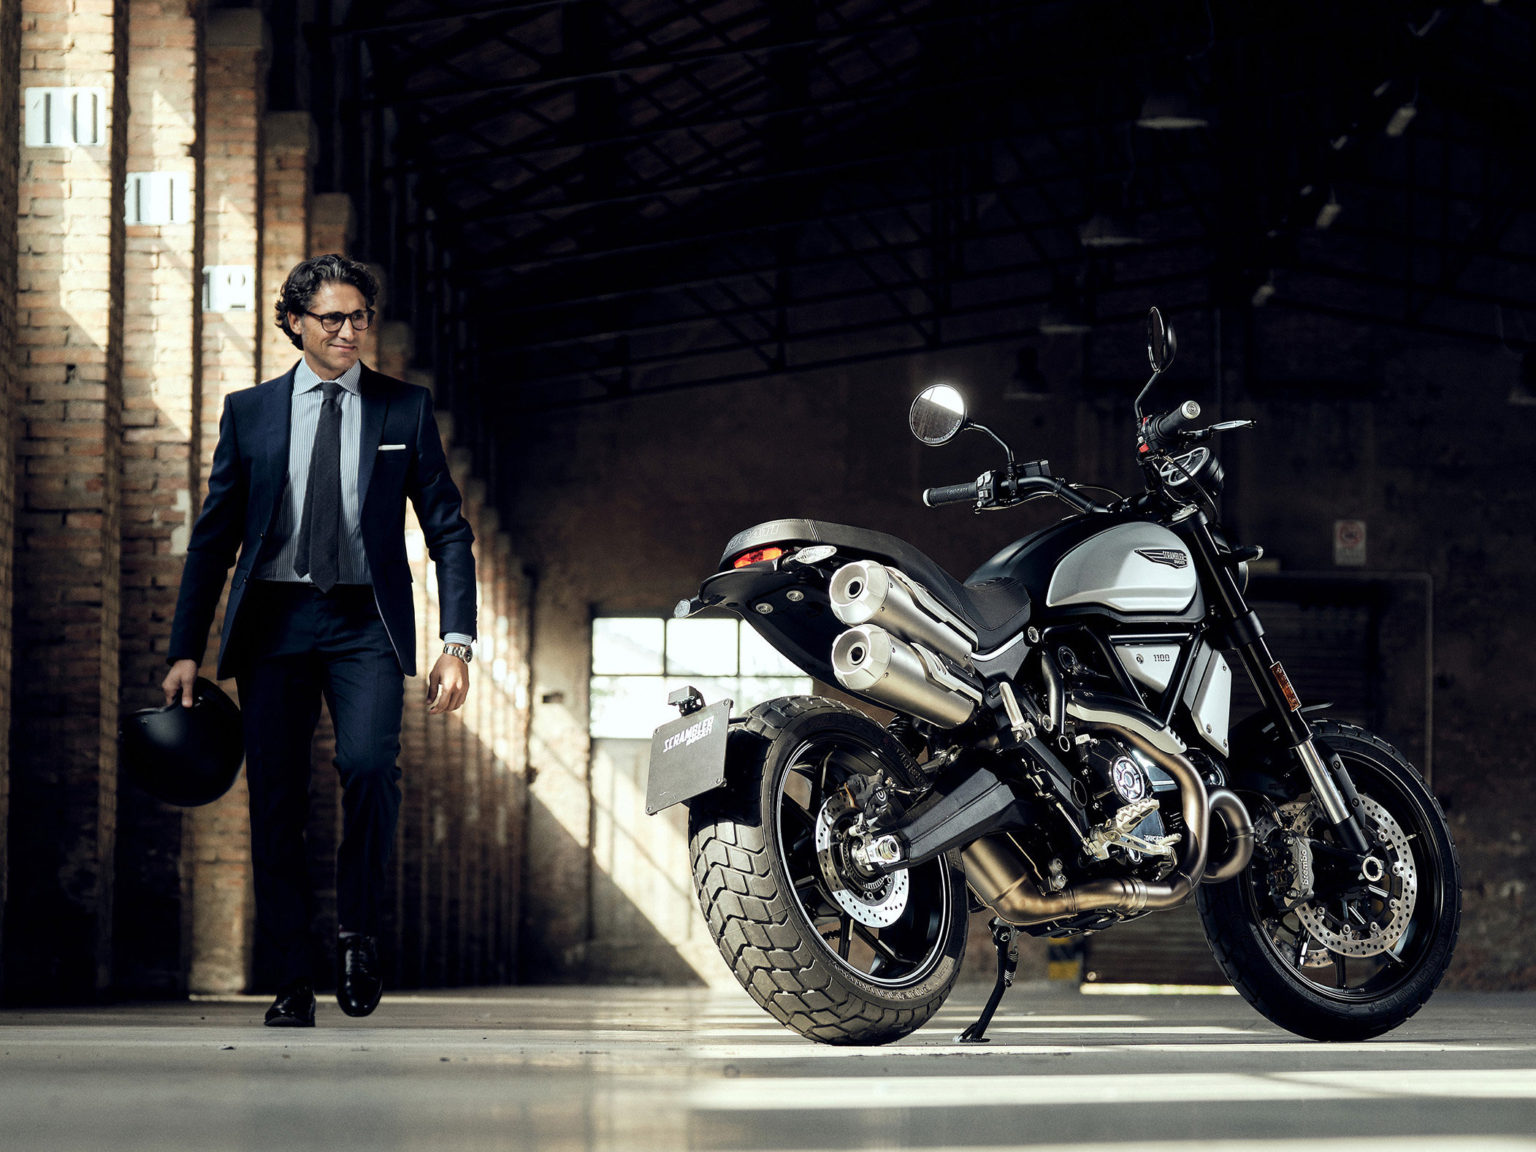 The new Ducati Scrambler 1100 Dark PRO is a blacked out jumping off point for creativity.